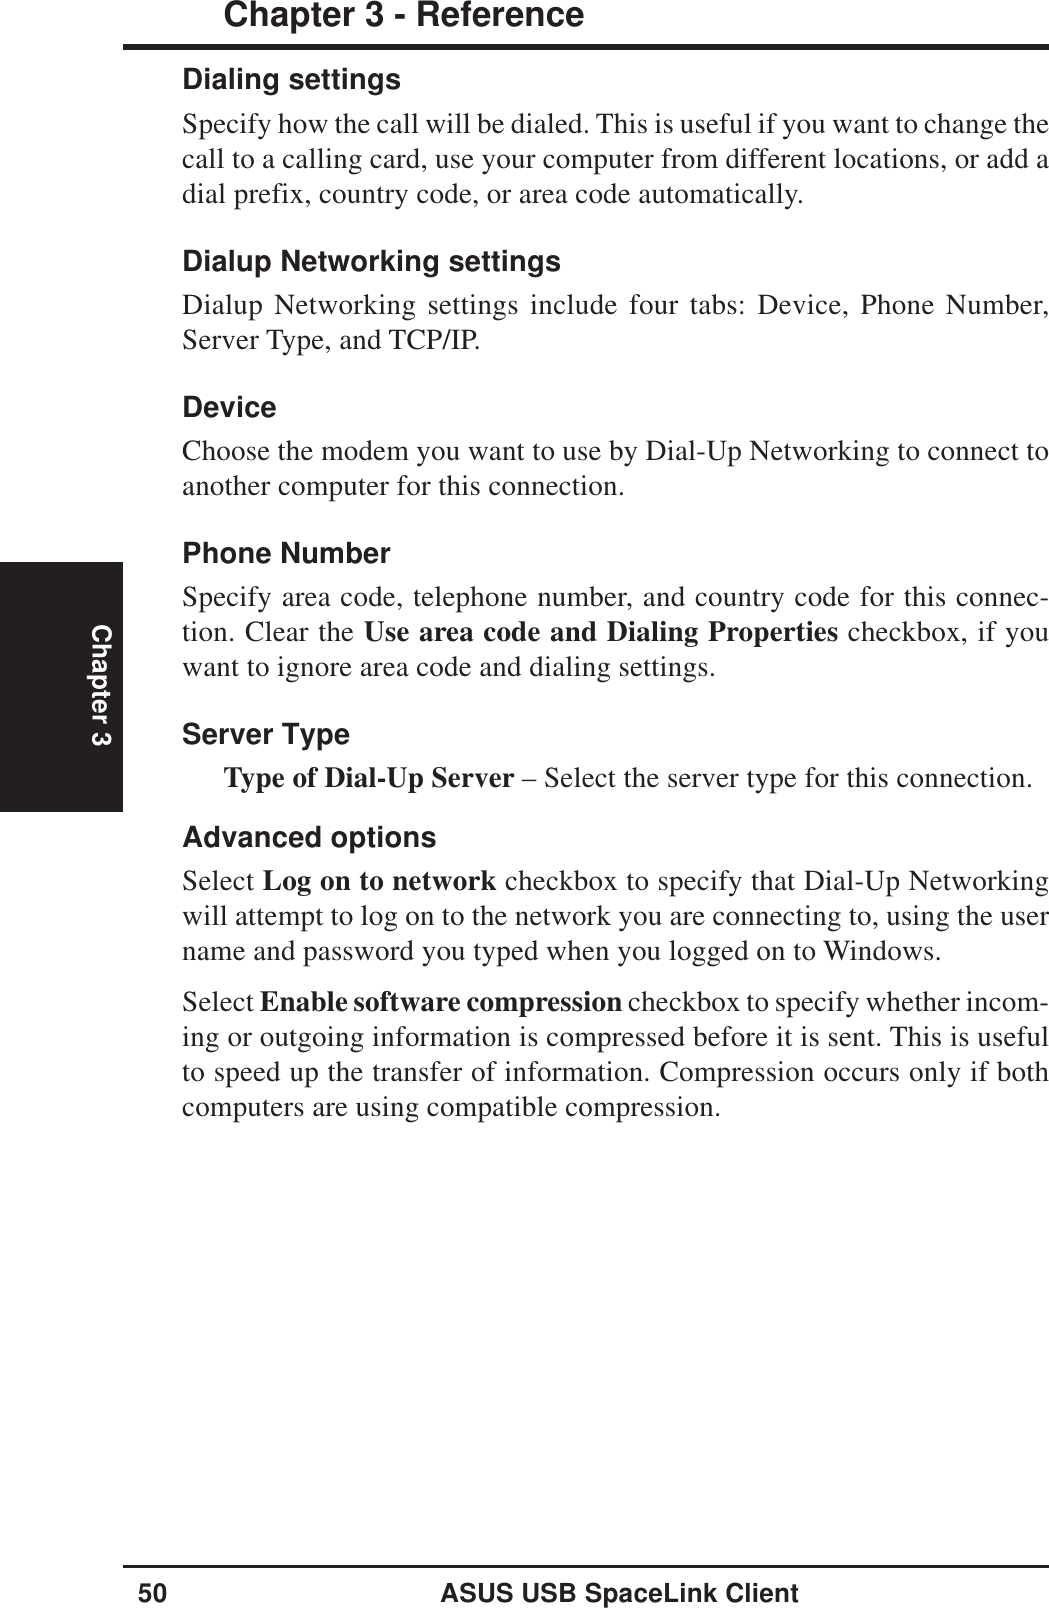 50 ASUS USB SpaceLink ClientChapter 3 - ReferenceChapter 3Dialing settingsSpecify how the call will be dialed. This is useful if you want to change thecall to a calling card, use your computer from different locations, or add adial prefix, country code, or area code automatically.Dialup Networking settingsDialup Networking settings include four tabs: Device, Phone Number,Server Type, and TCP/IP.DeviceChoose the modem you want to use by Dial-Up Networking to connect toanother computer for this connection.Phone NumberSpecify area code, telephone number, and country code for this connec-tion. Clear the Use area code and Dialing Properties checkbox, if youwant to ignore area code and dialing settings.Server TypeType of Dial-Up Server – Select the server type for this connection.Advanced optionsSelect Log on to network checkbox to specify that Dial-Up Networkingwill attempt to log on to the network you are connecting to, using the username and password you typed when you logged on to Windows.Select Enable software compression checkbox to specify whether incom-ing or outgoing information is compressed before it is sent. This is usefulto speed up the transfer of information. Compression occurs only if bothcomputers are using compatible compression.